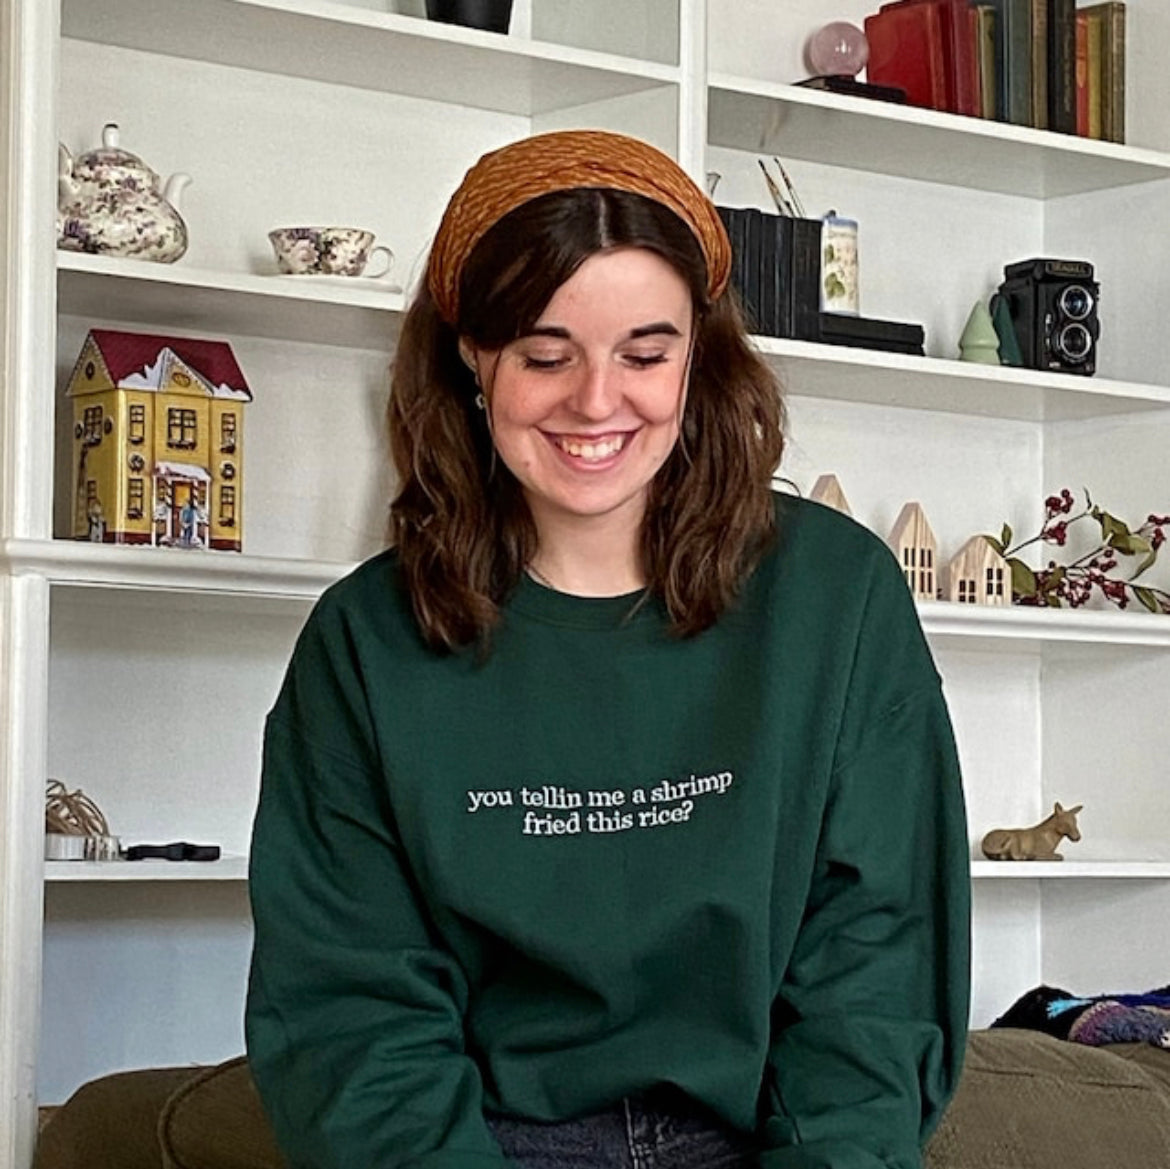 a woman sitting on a couch wearing a green sweatshirt